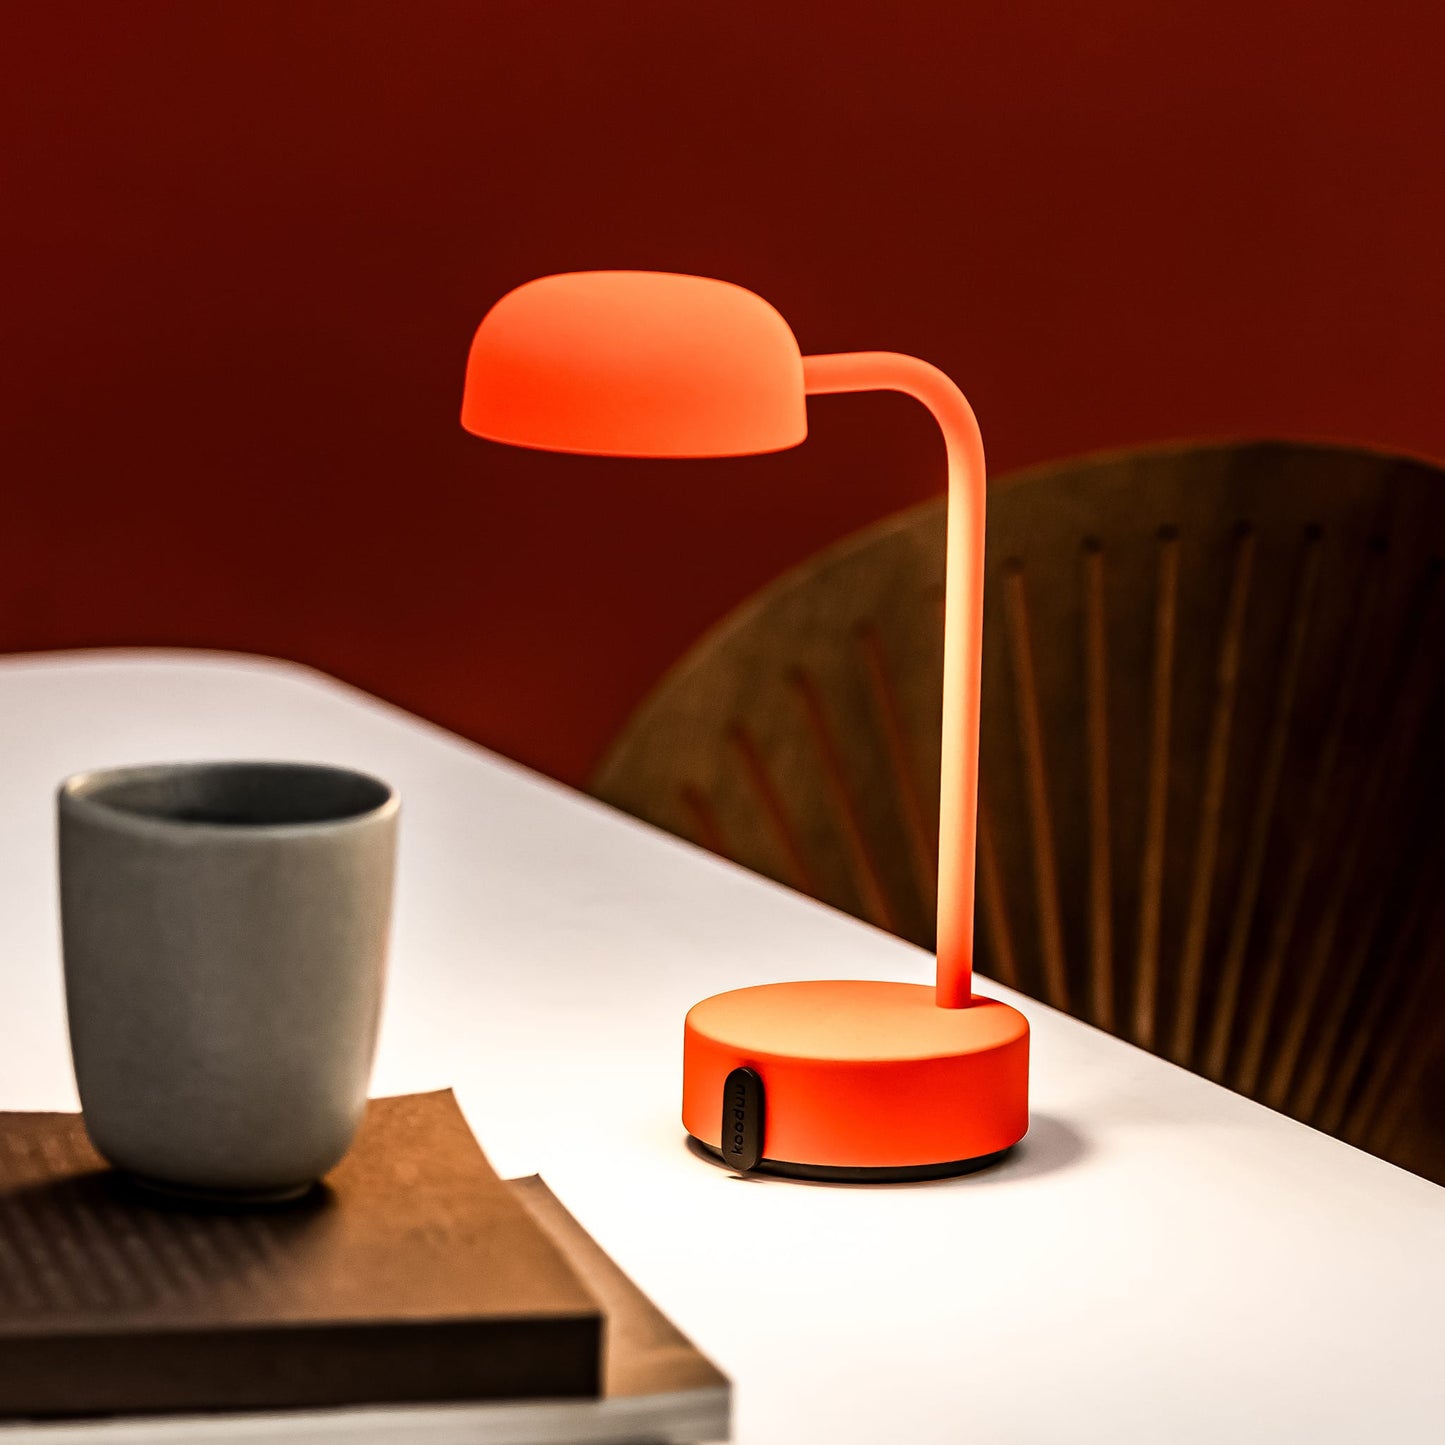 Fokus Orange LED lamp by Kooduu, portable and dimmable for Canadian homes and work.